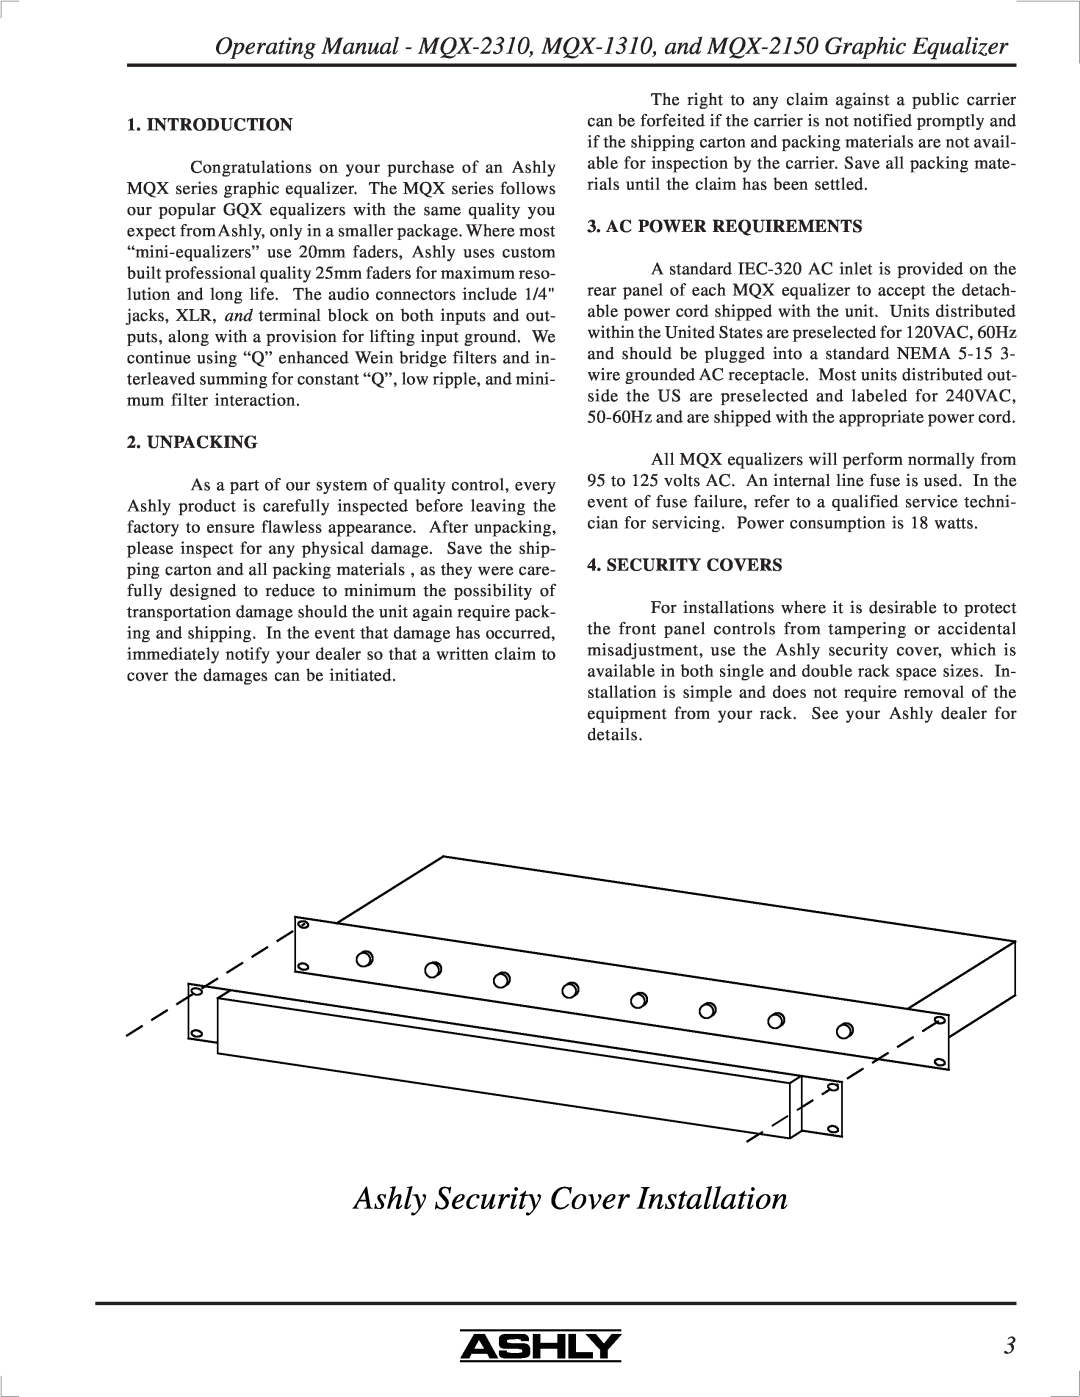 Ashly MQX-2310 manual Ashly Security Cover Installation, Introduction, Unpacking, Ac Power Requirements, Security Covers 